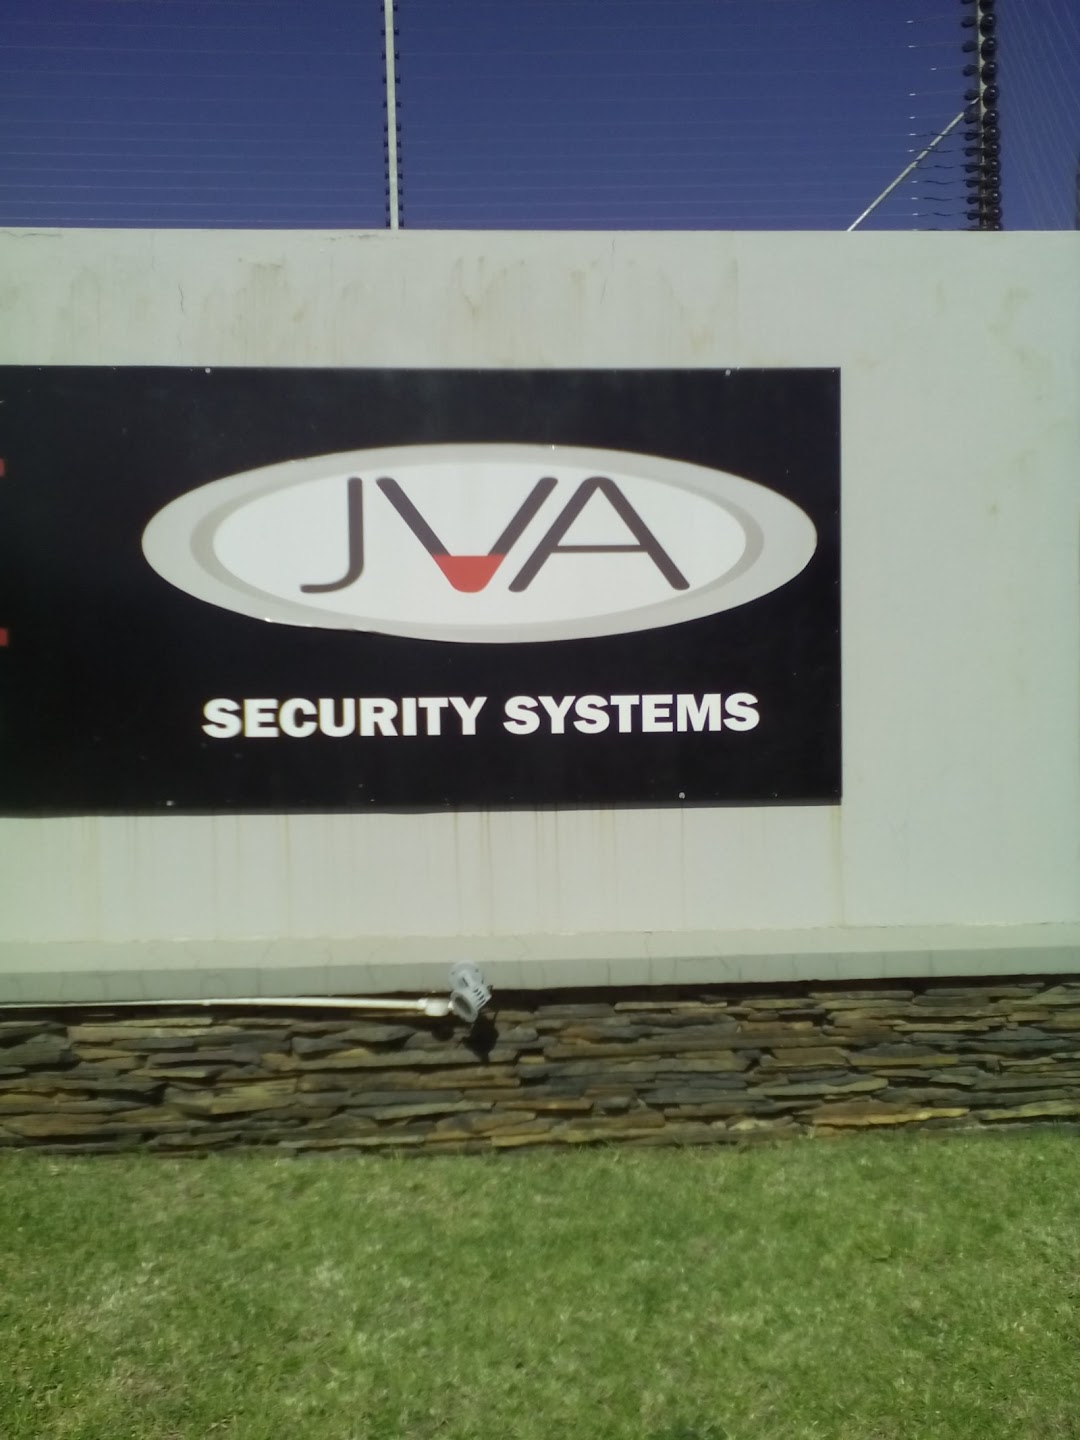 JVA Security Systems